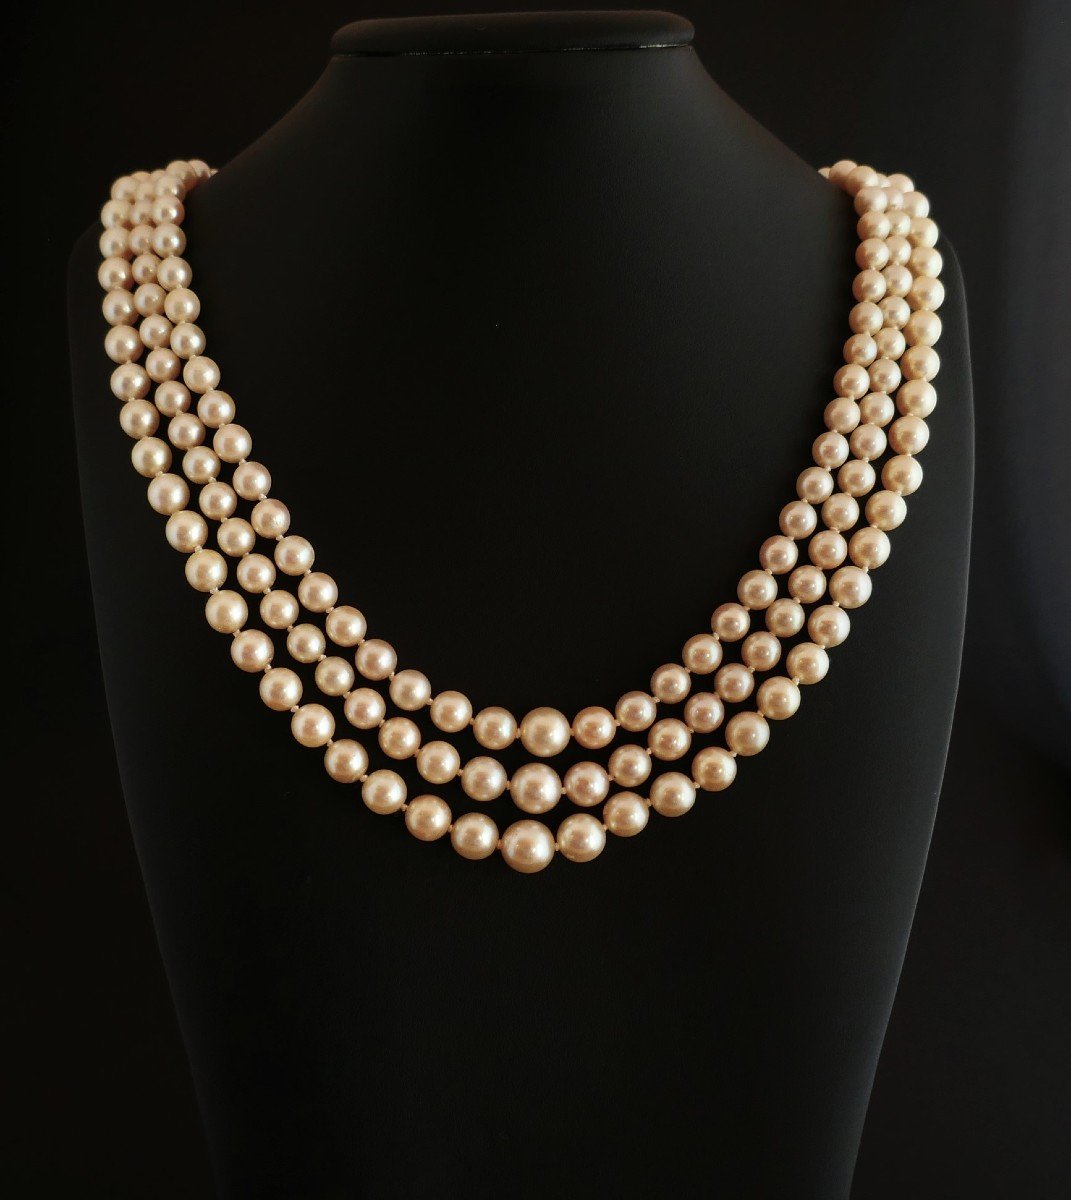 3 Row Cultured Pearl Necklace, Pearl Clasp.